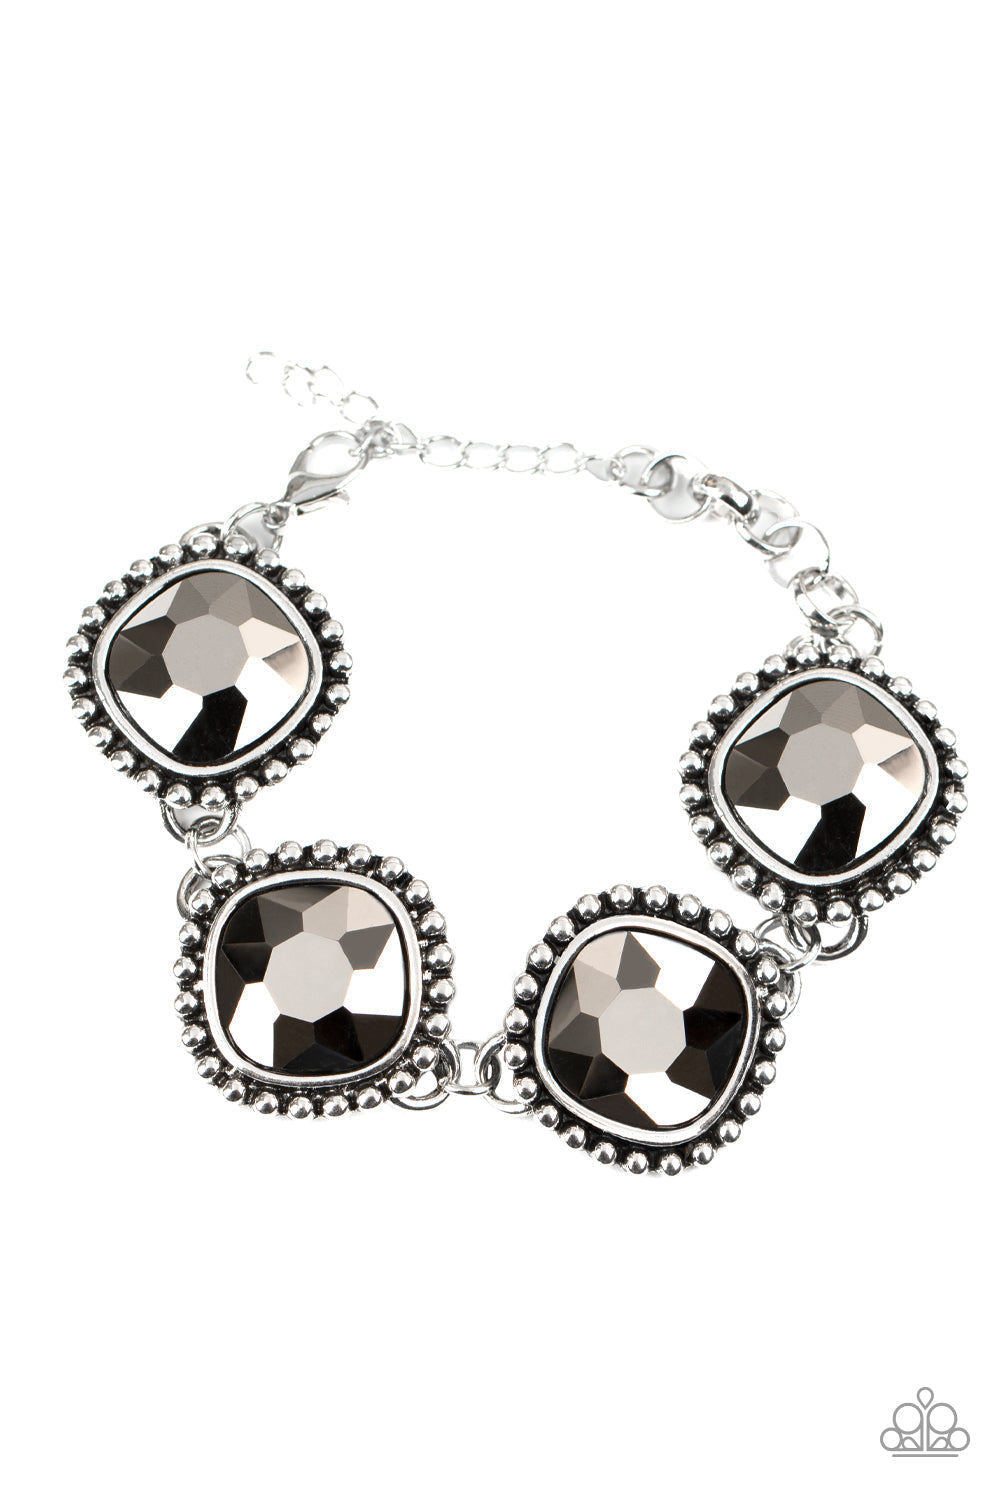 Megawatt - Silver Hematite Bracelet - Paparazzi Accessories - Exaggerated display of oversized hematite rhinestone encrusted frames delicately link around the wrist for a blinding look. Features an adjustable clasp closure. Sold as one individual bracelet.